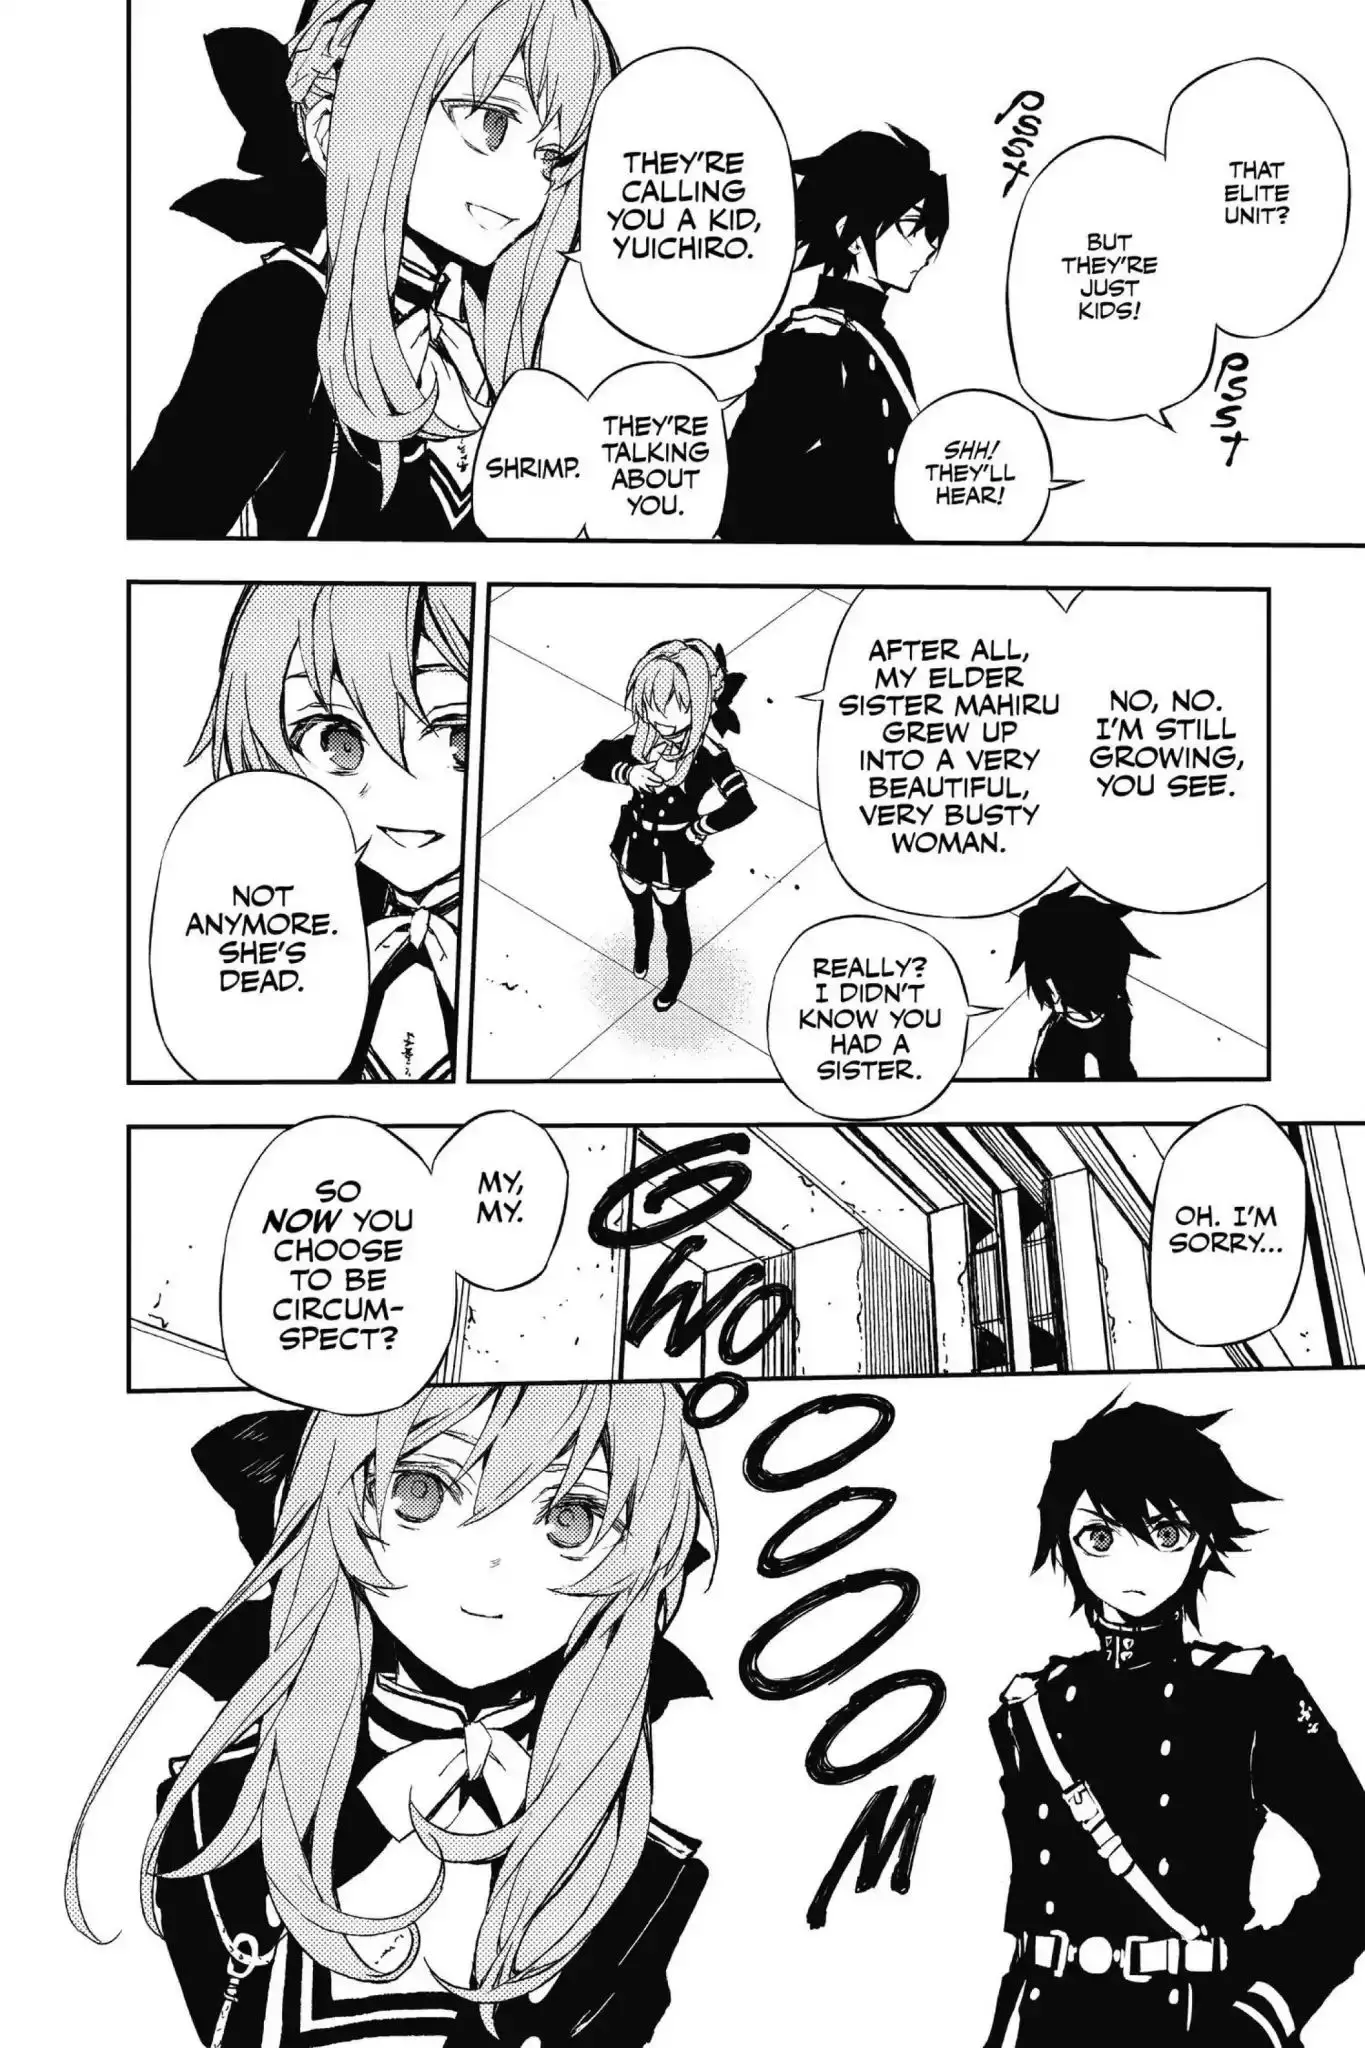 Seraph Of The End - 8 page 14-7fd423cf